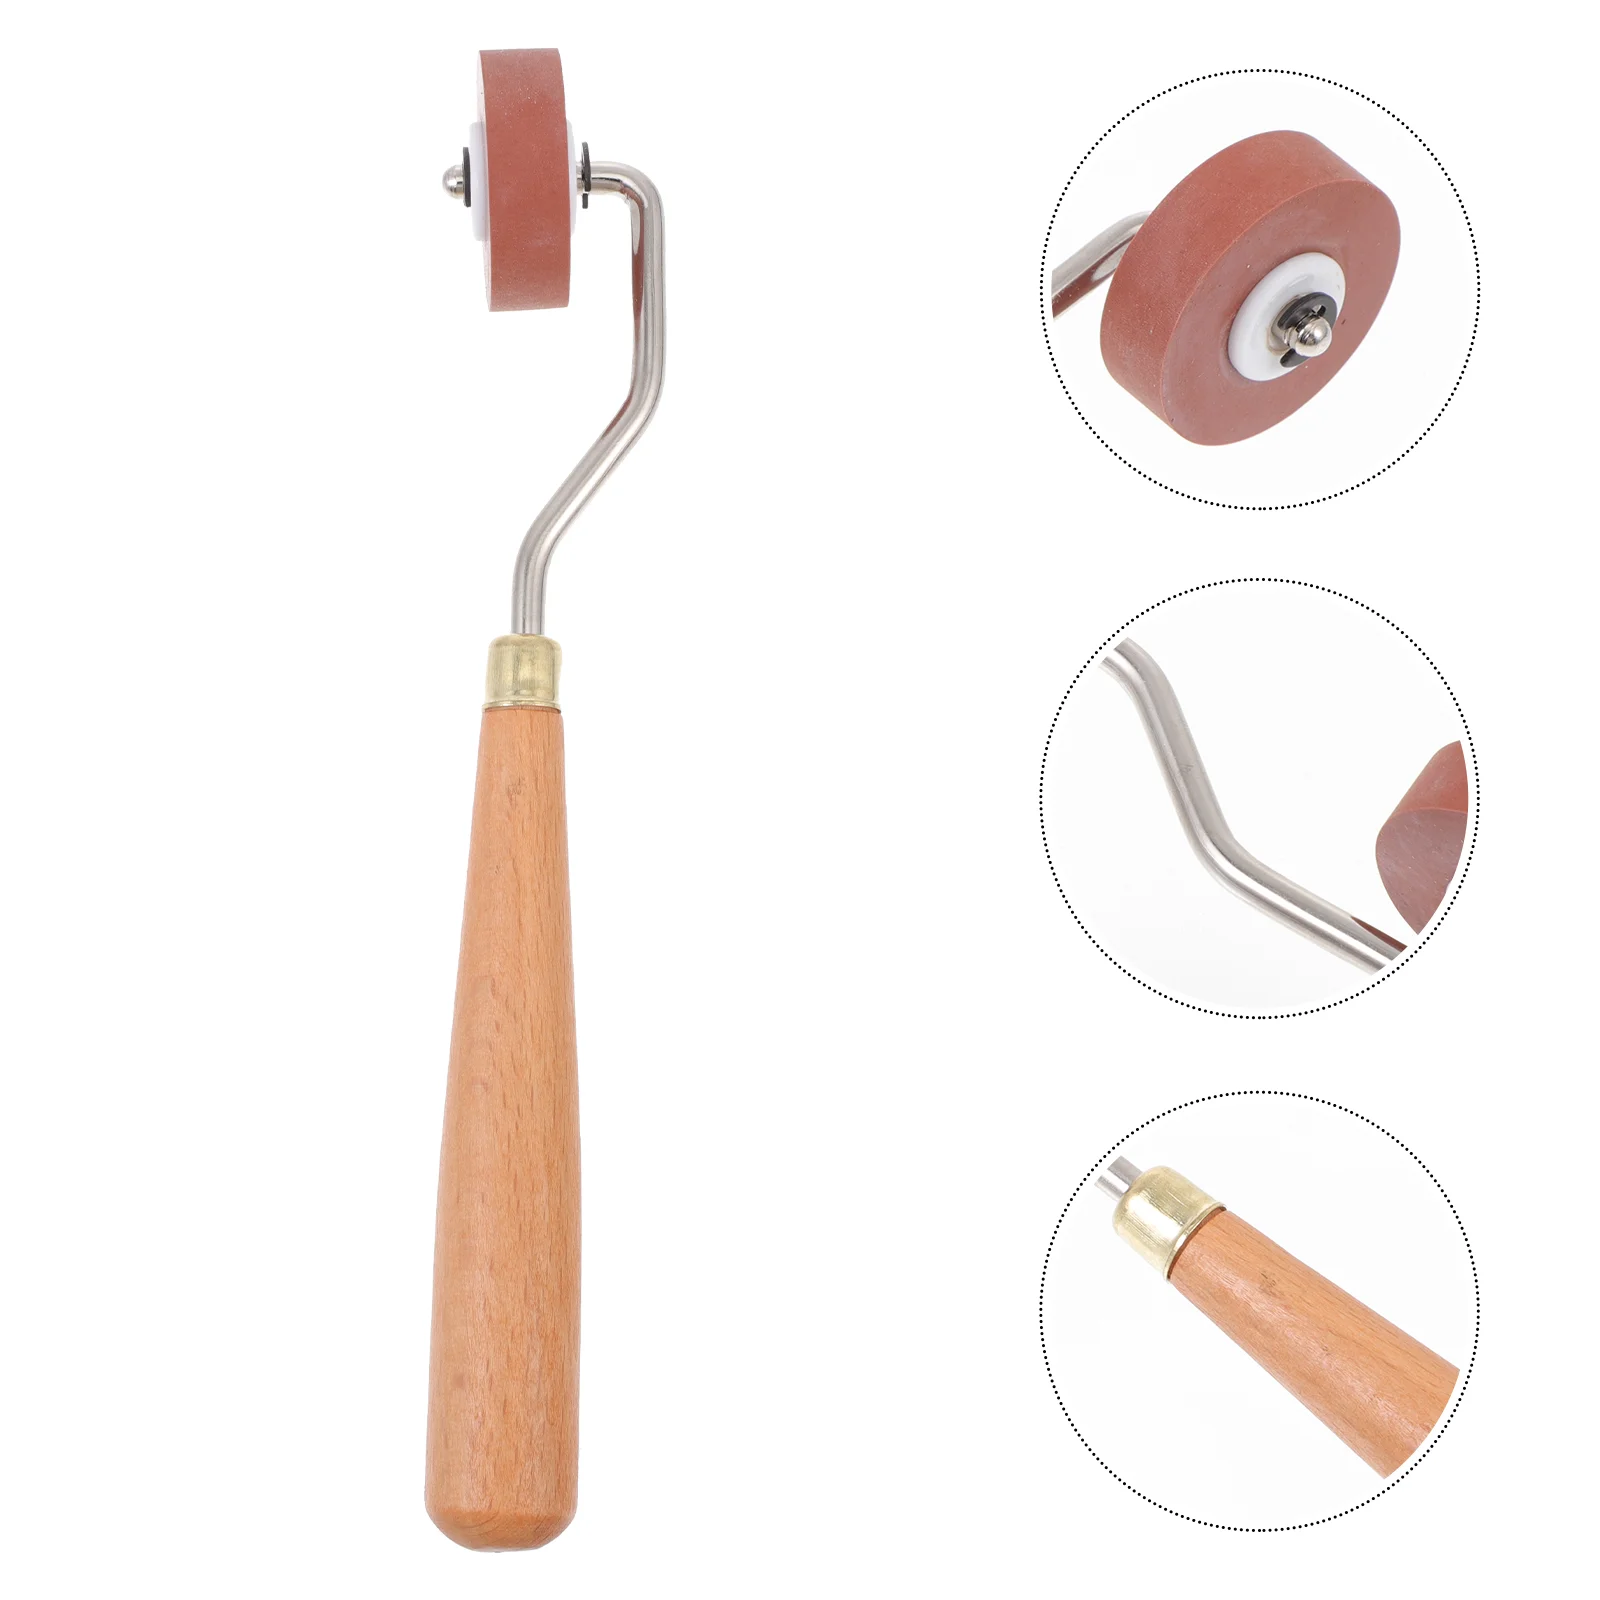 

Roller Rubber Brayer Stamping Printmaking Rollers Ink Printing Tool Seam Wallpaper Painting Brayers Student Brush Crafts